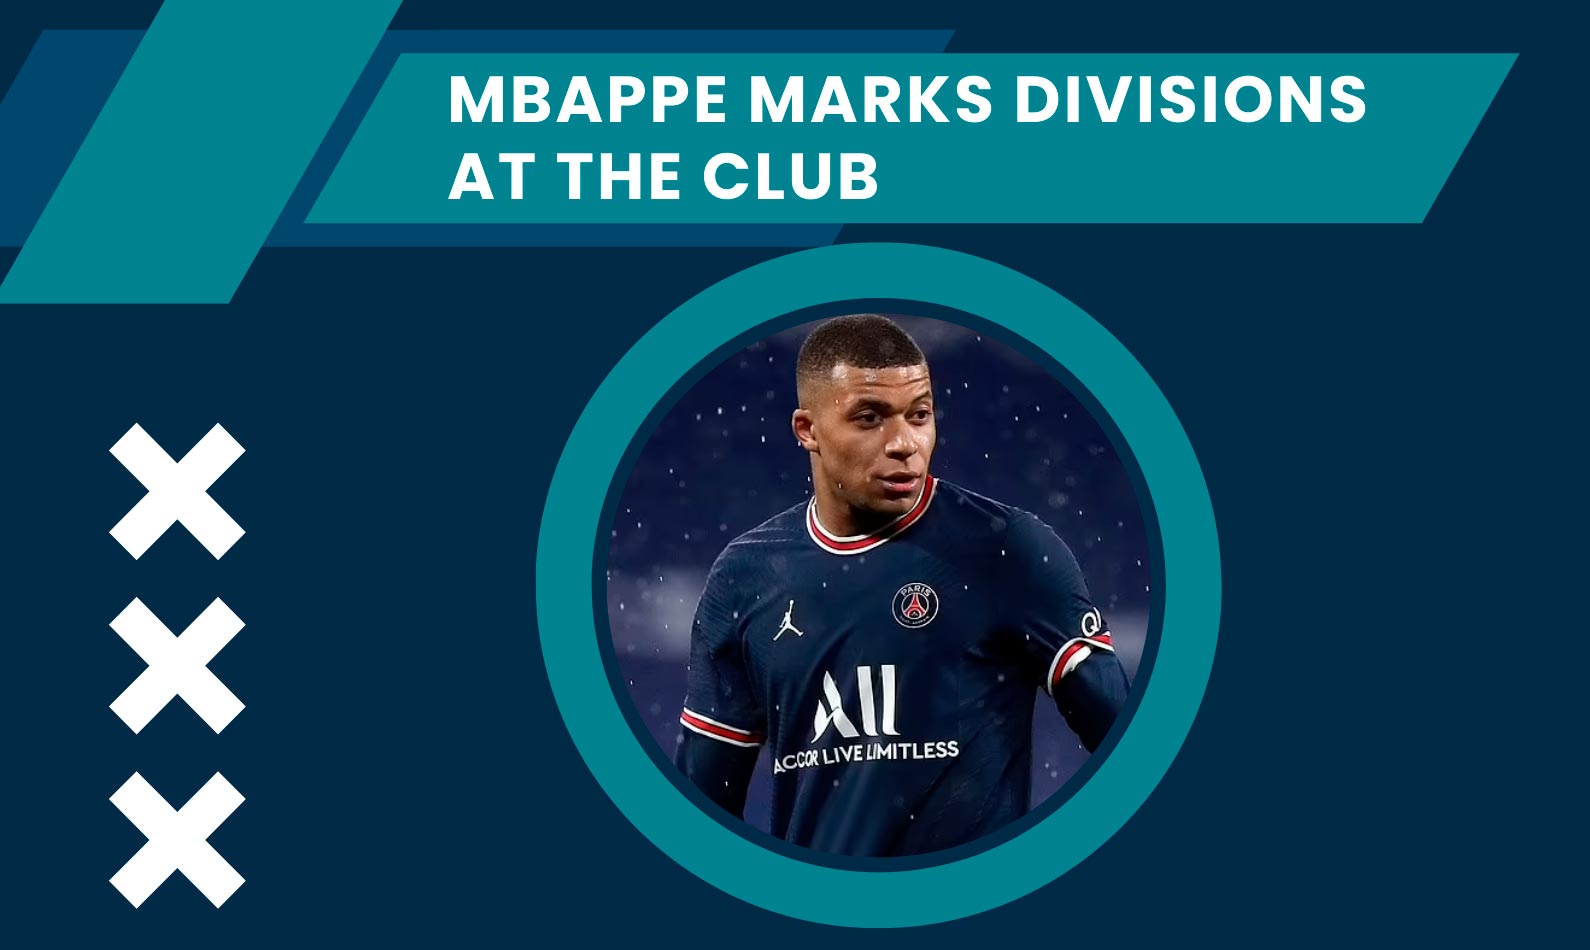 Kylian Mbappe, the extremely talented and highly sought-after French forward